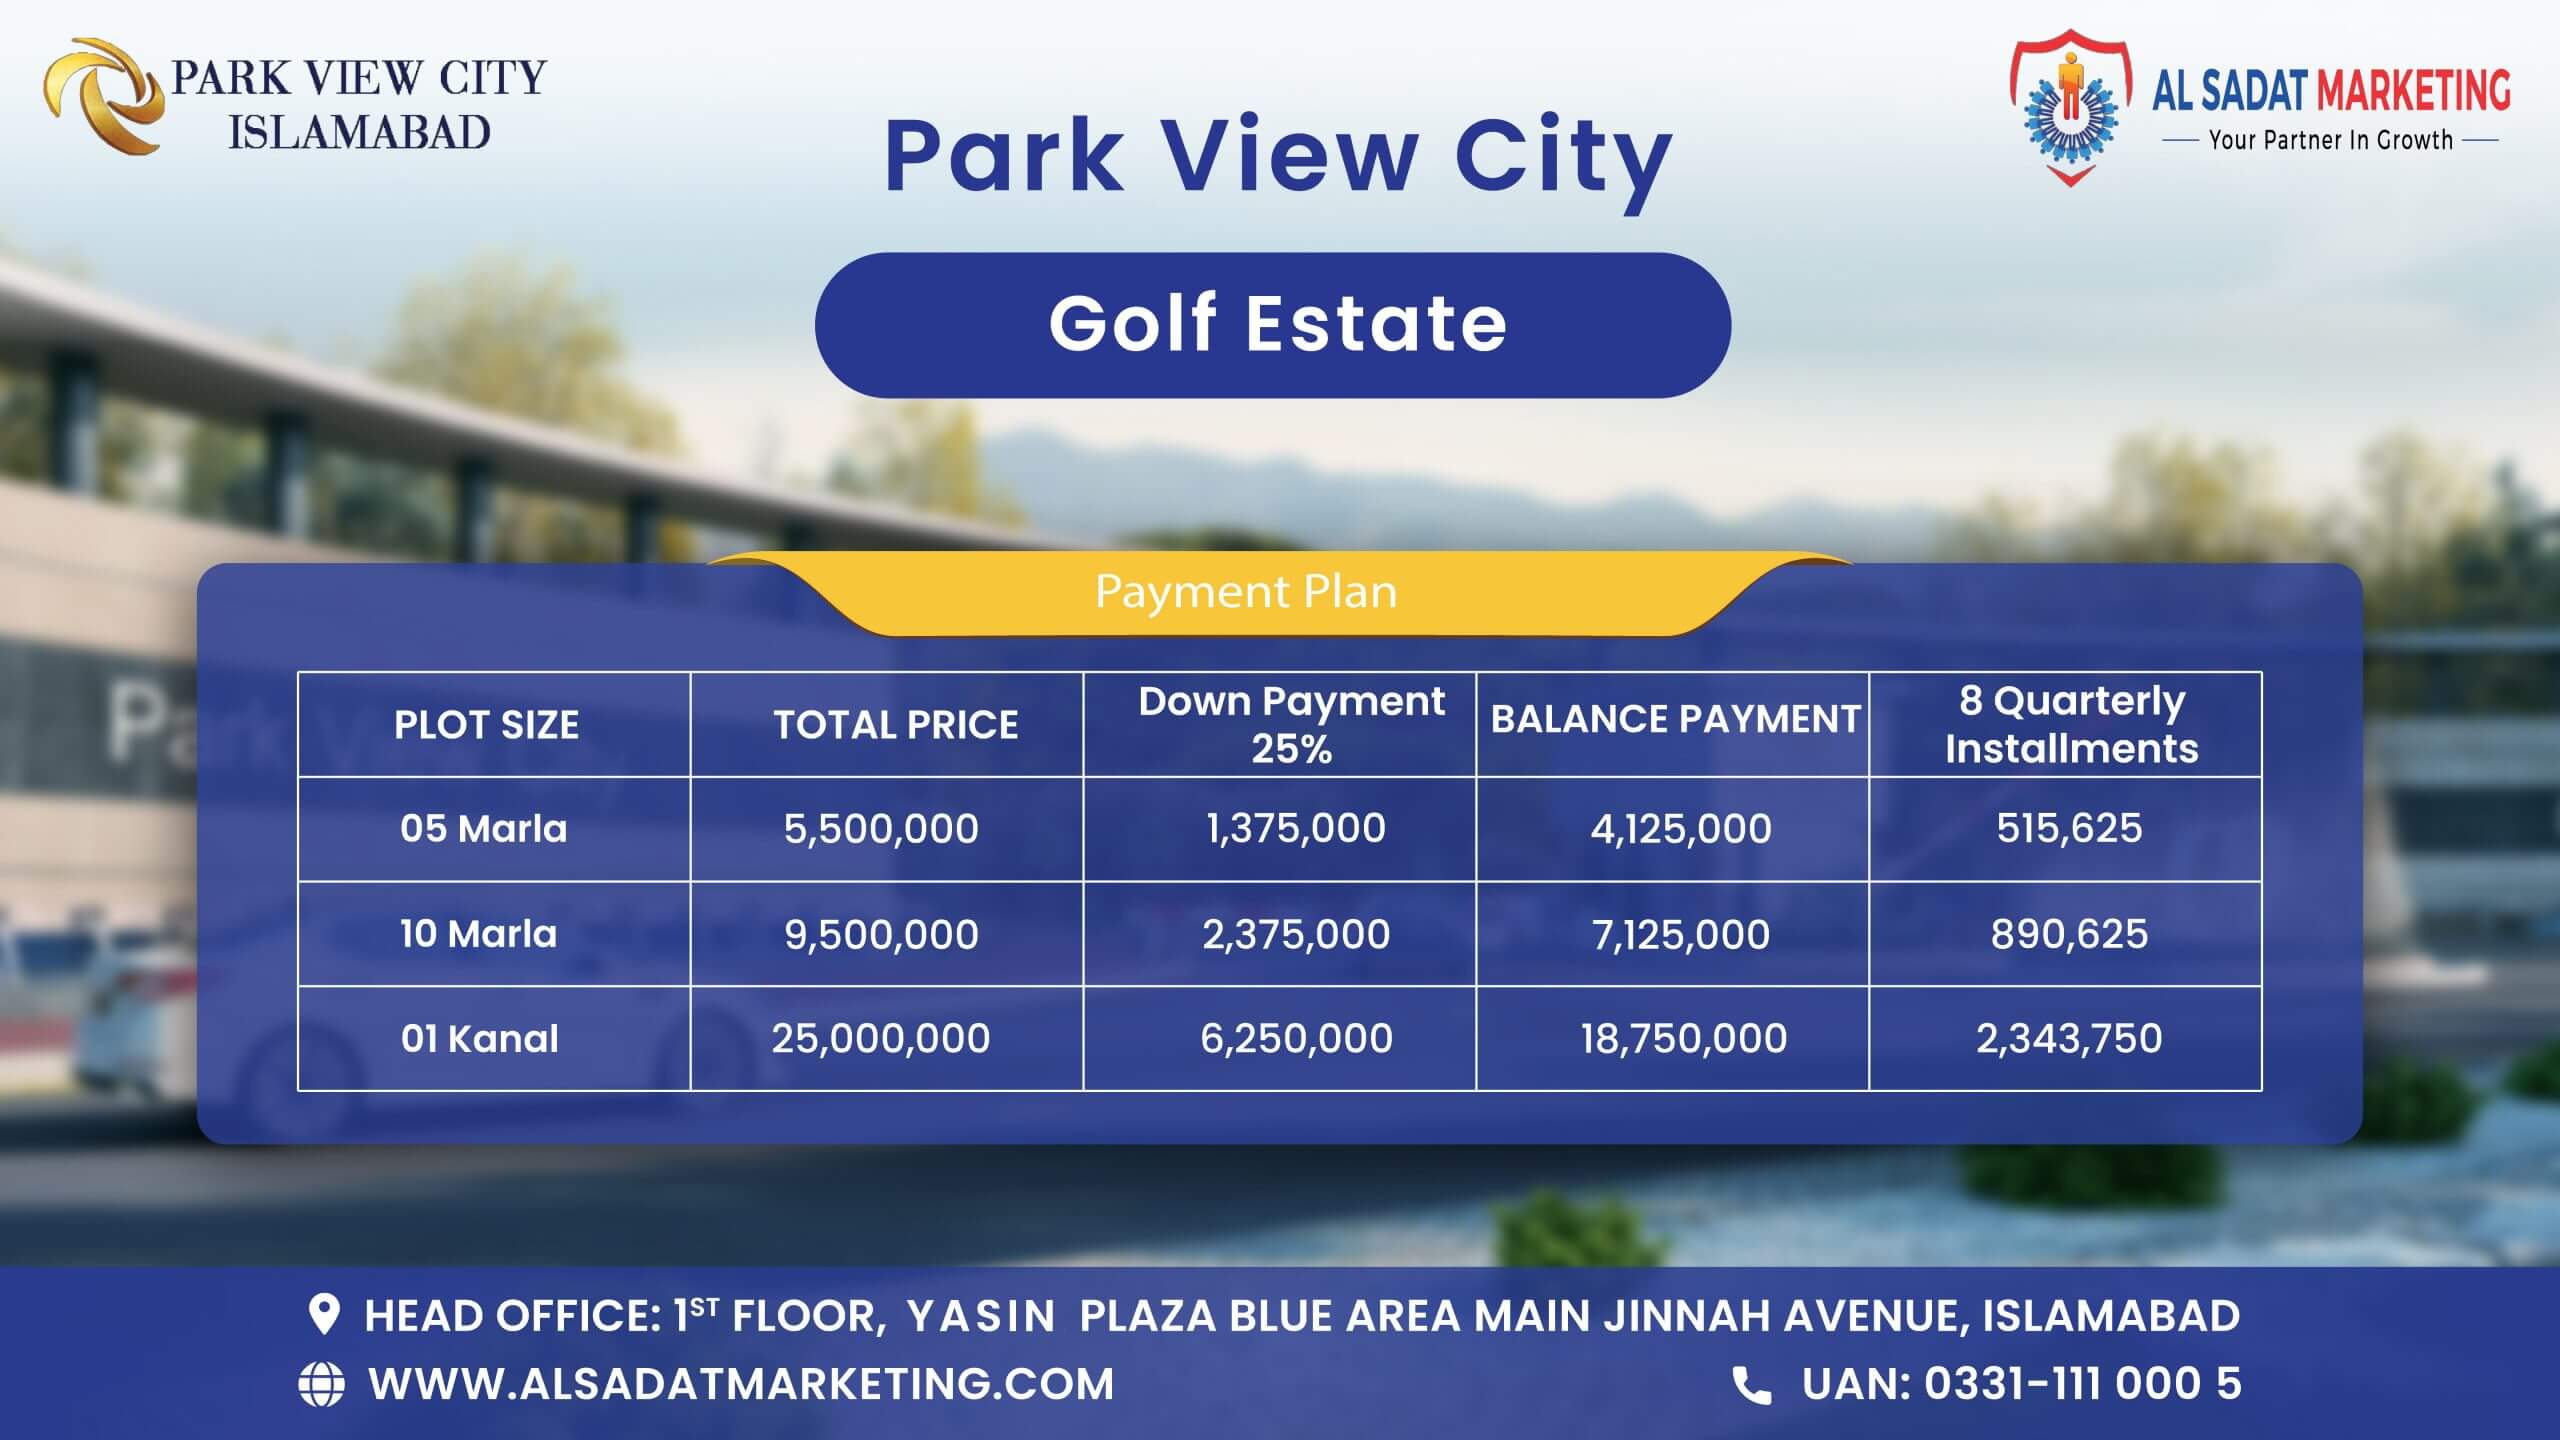 park view city islamabad golf estate payment plan - park view city golf estate payment plan - park view city islamabad payment plan - park view city payment plan - payment plan of park view city islamabad – payment plan of park view city – park view city islamabad – park view city – park view city housing society - park view city islamabad housing society – park view city real estate project - park view city islamabad real estate project - al sadat marketing - alsadat marketing - al-sadat marketing